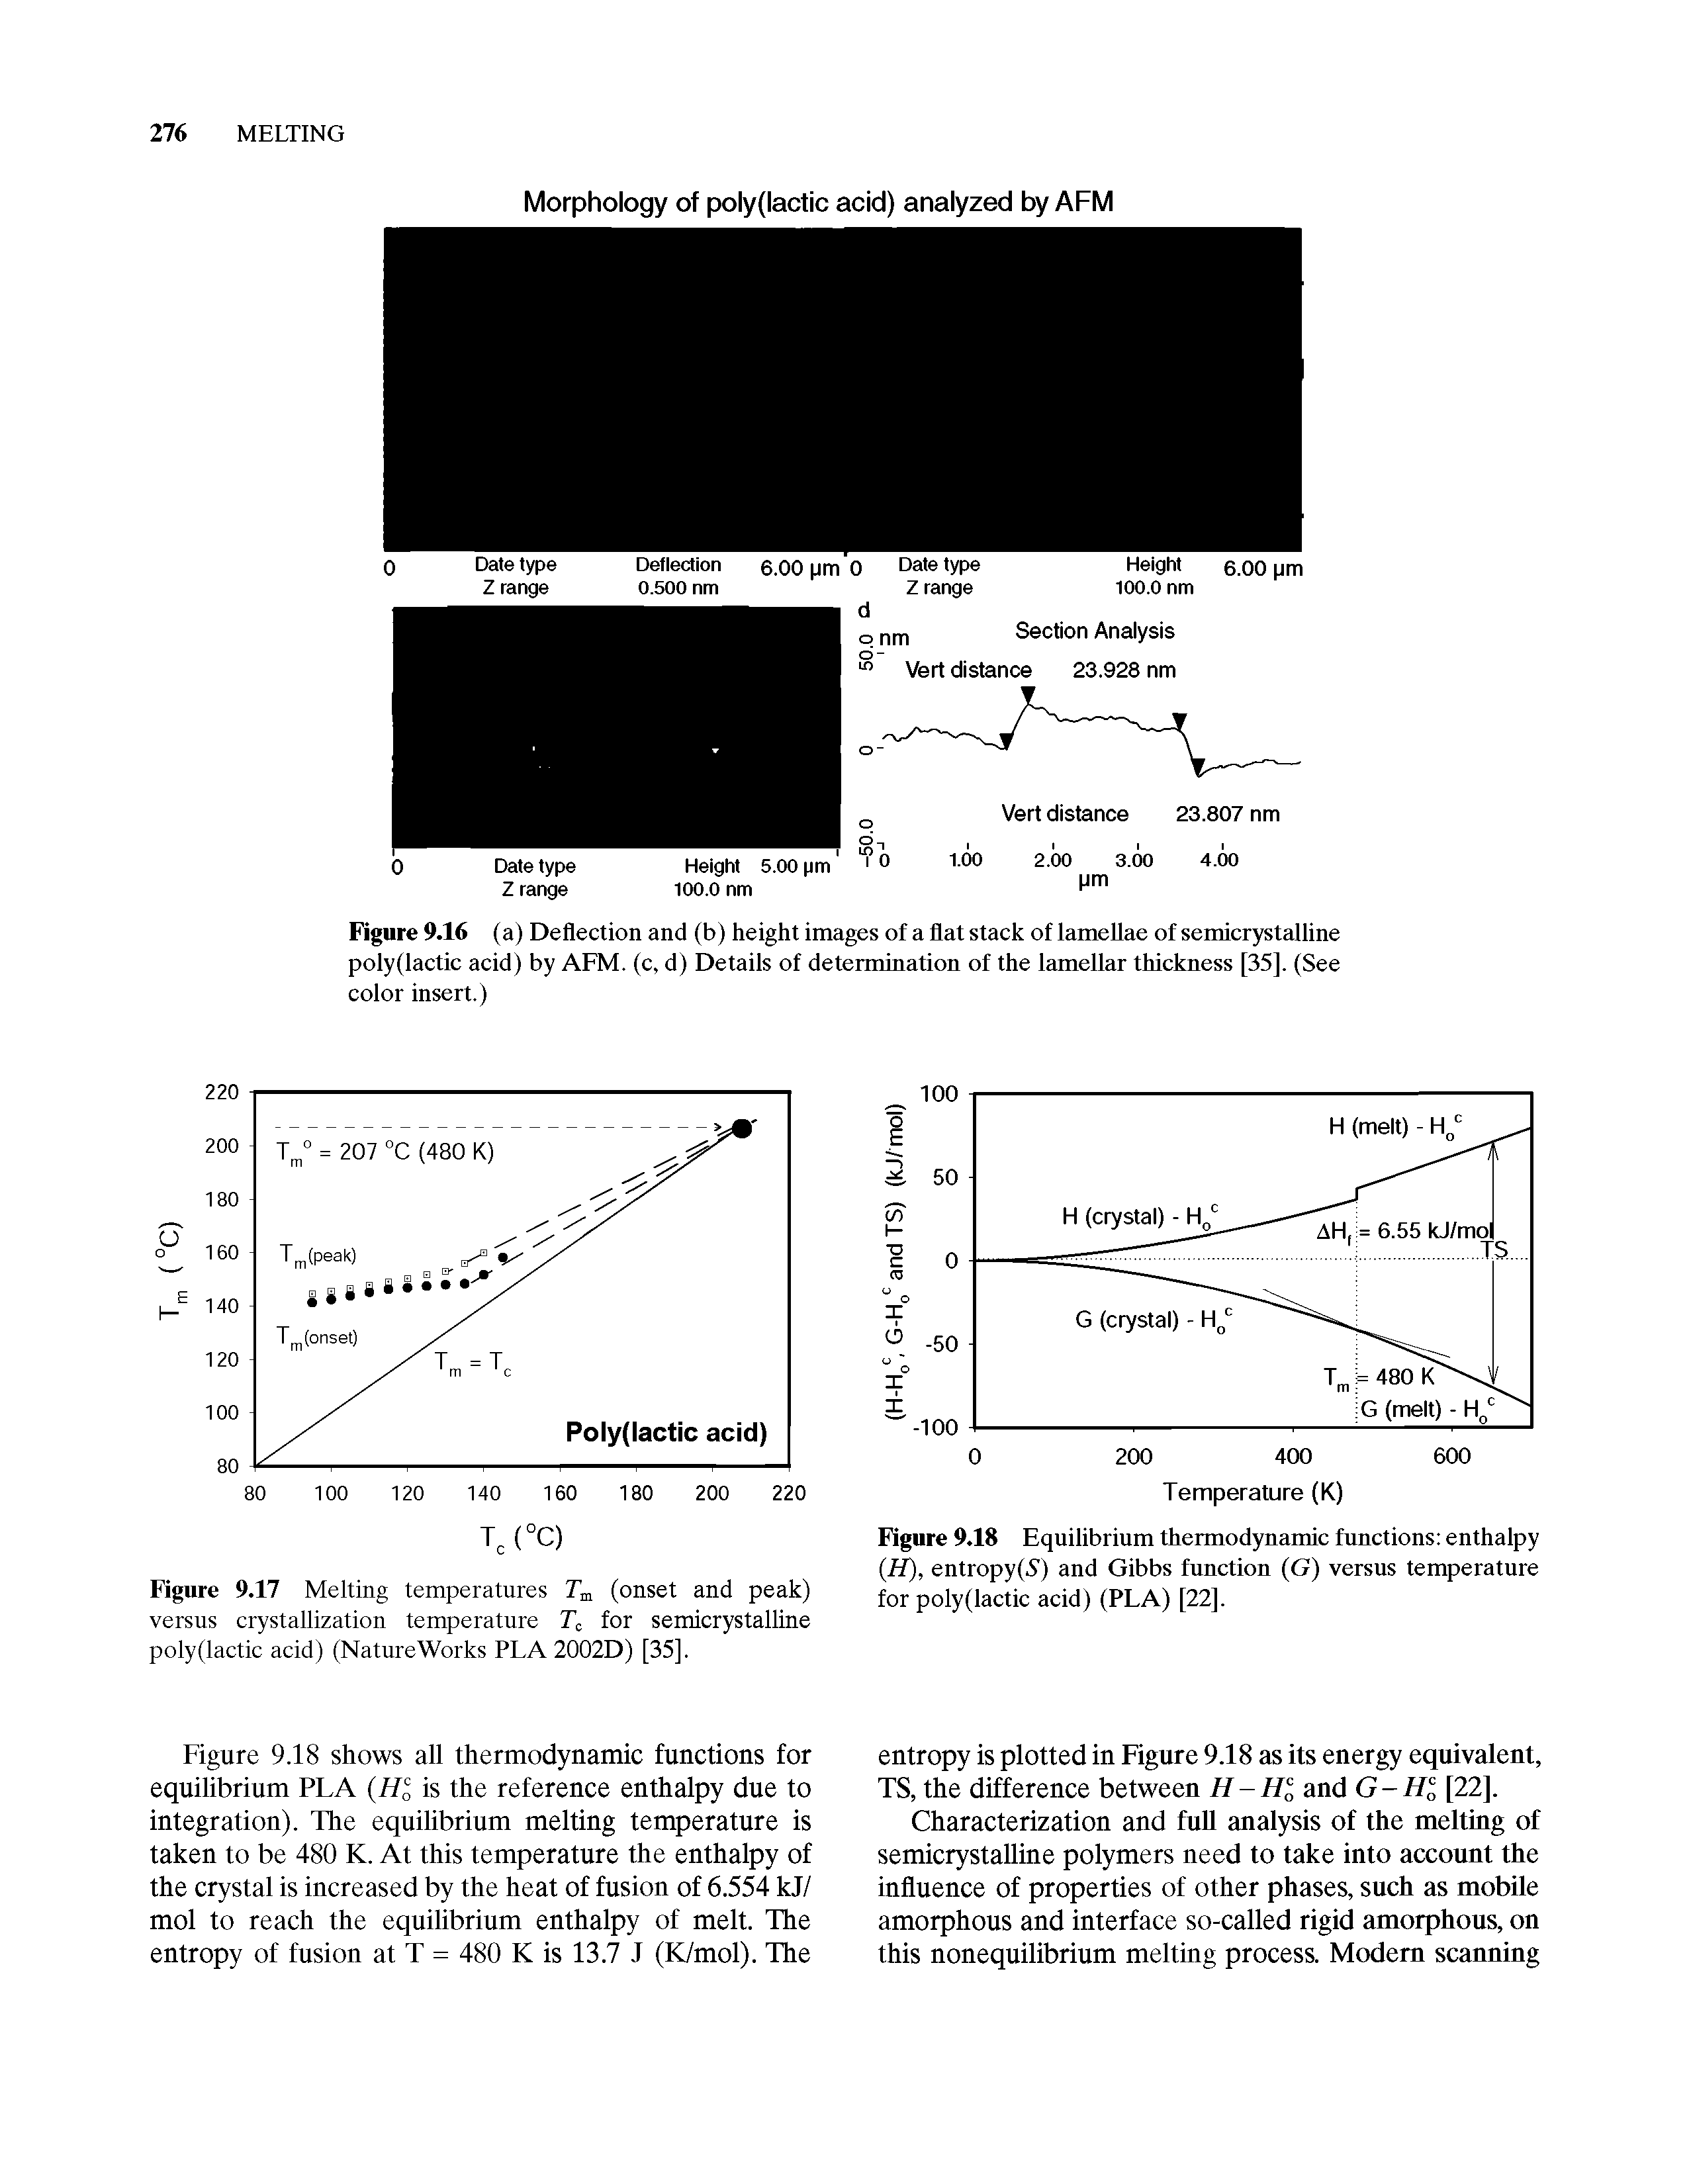 Figure 9.18 Equilibrium thermodynamic functions enthalpy (H), entropy(5) and Gibbs function (G) versus temperature for poly (lactic acid) (PLA) [22].